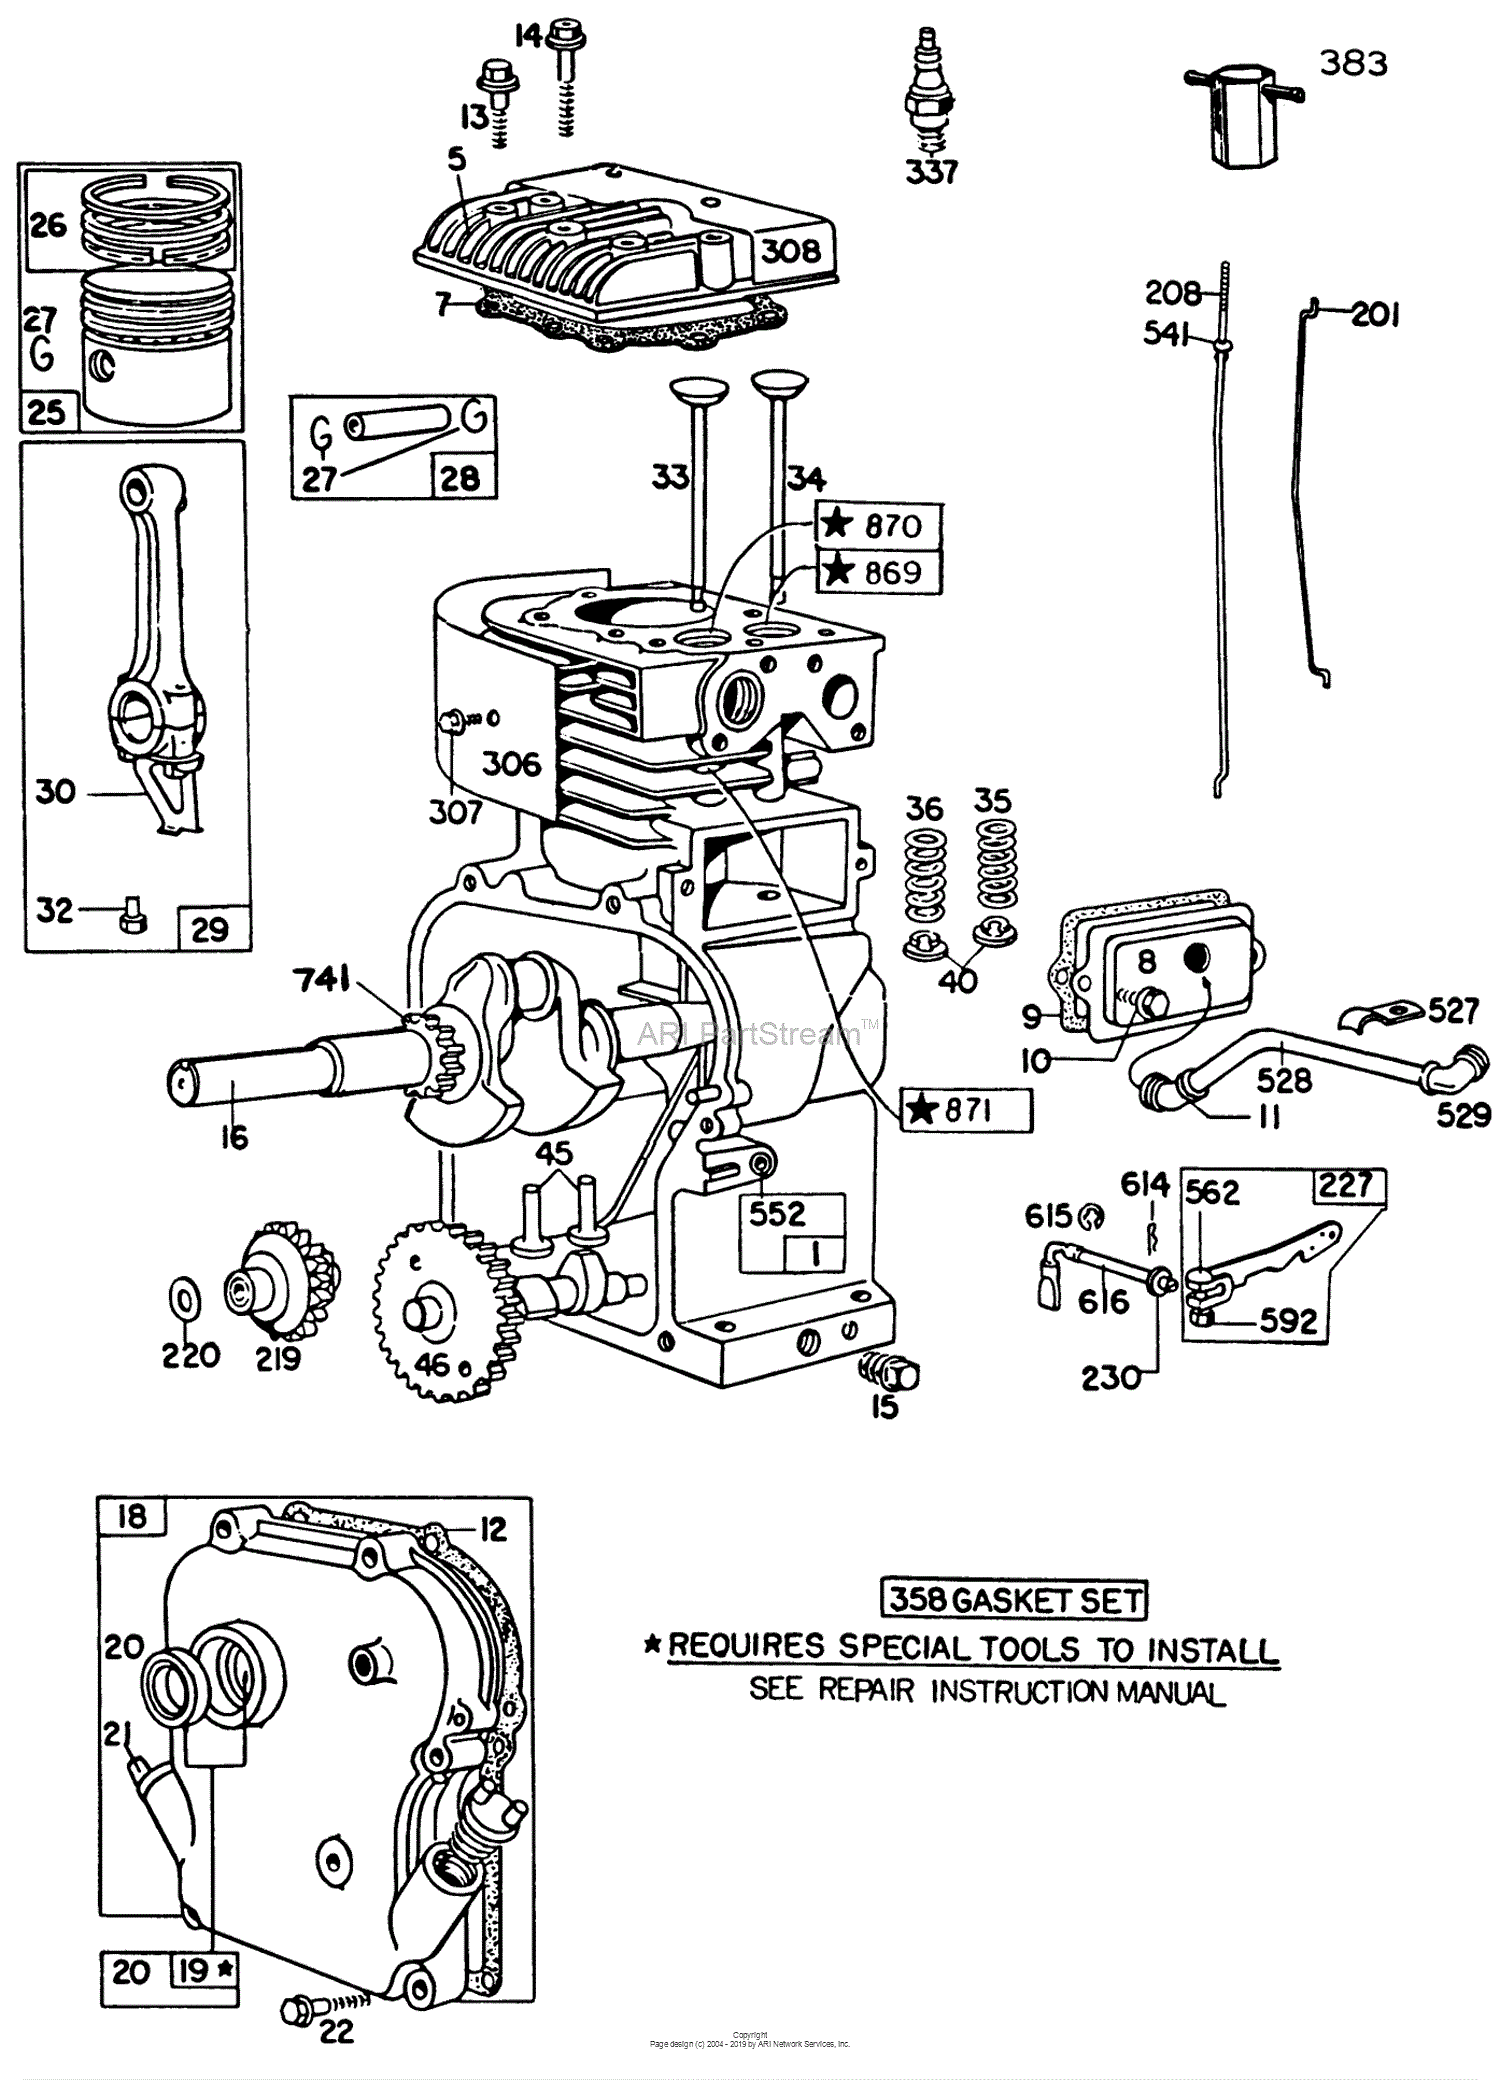 Briggs And Stratton Throttle Linkage Diagram 5hp Wiring Diagram